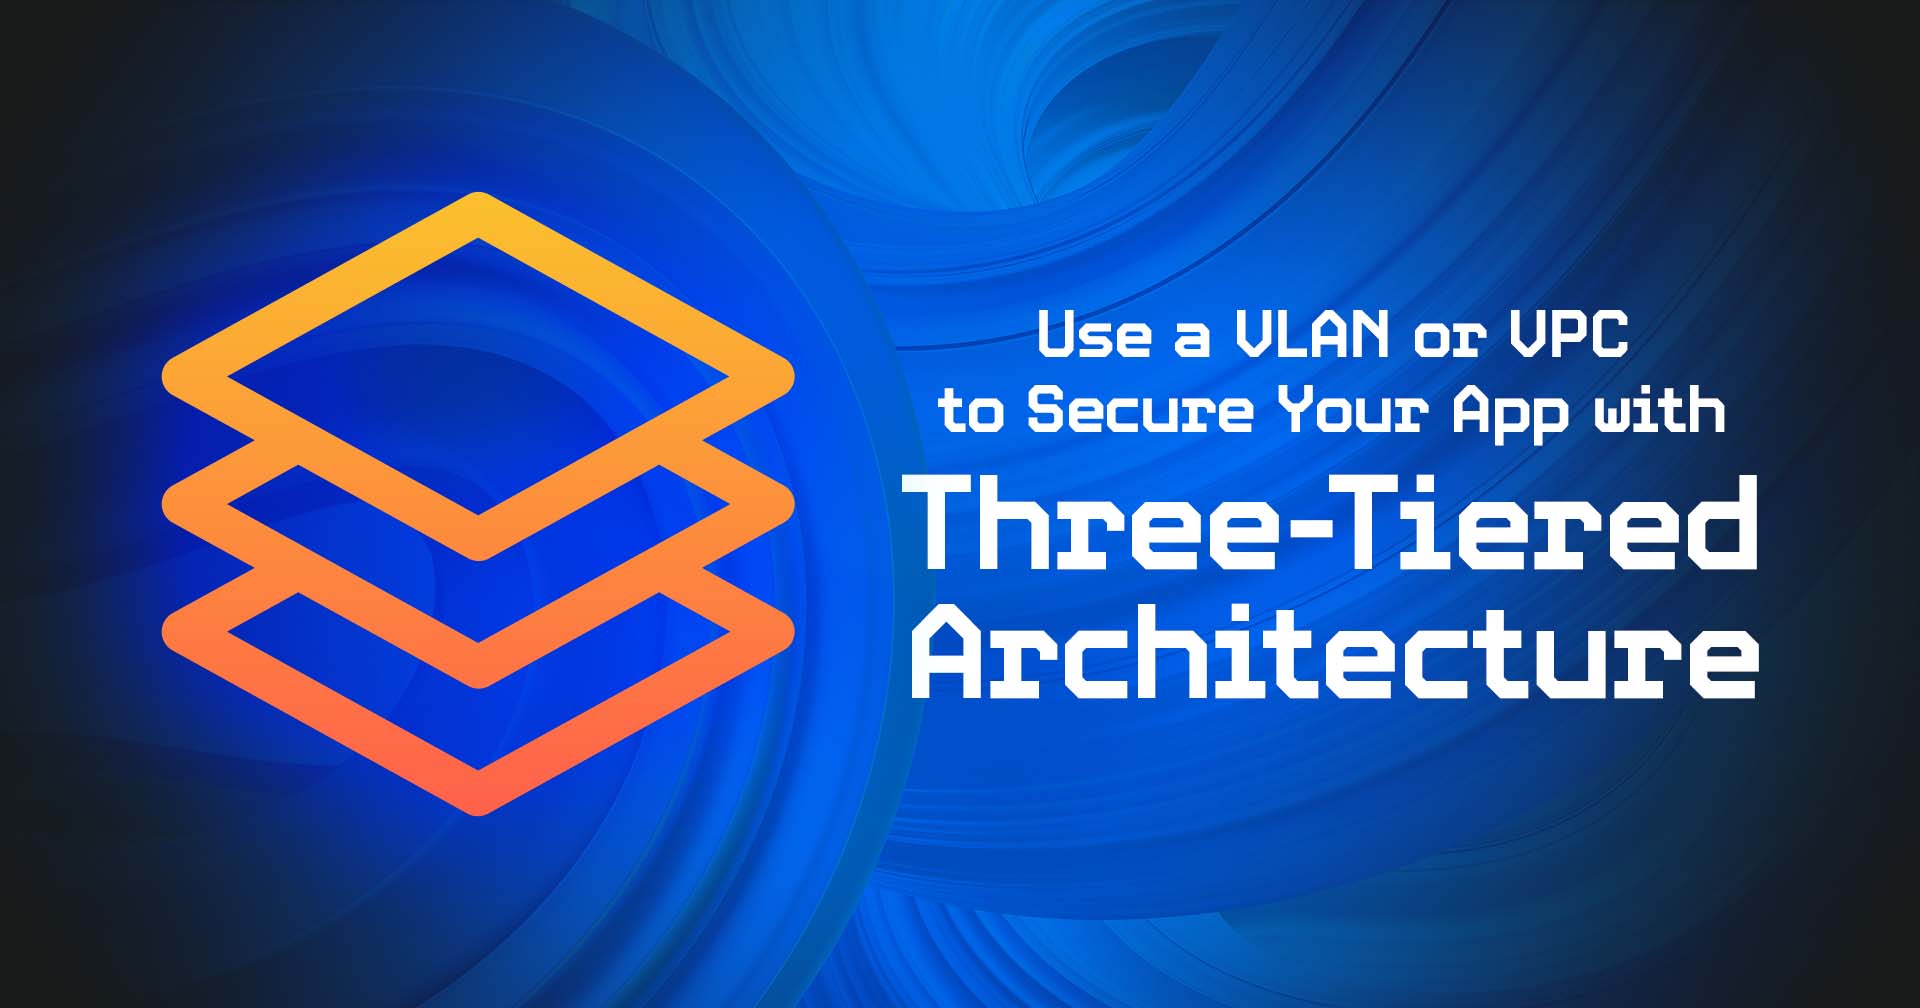 Three-Tiered Architecture uses a Data, Application, and Presentation Tier